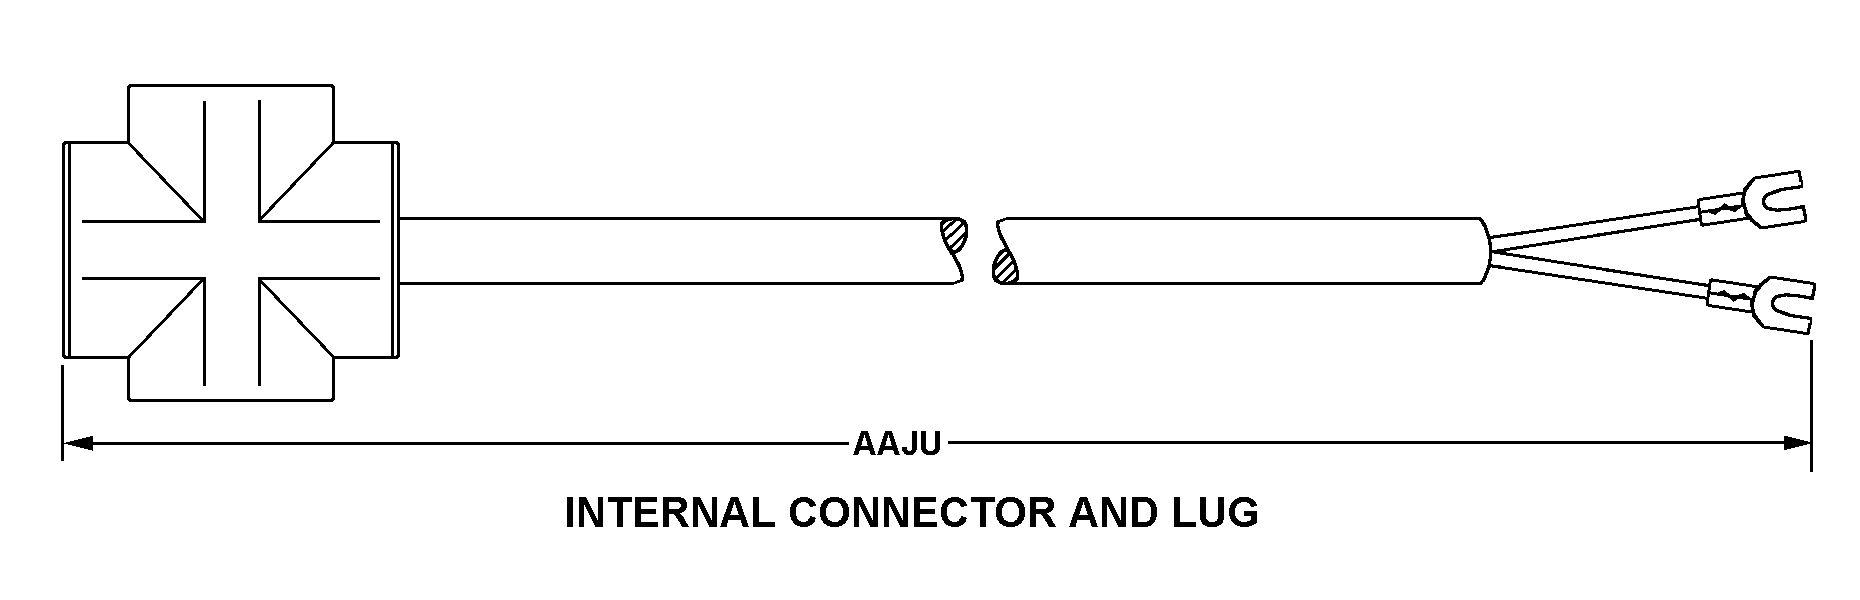 INTERNAL CONNECTOR AND LUG style nsn 5995-00-925-4381